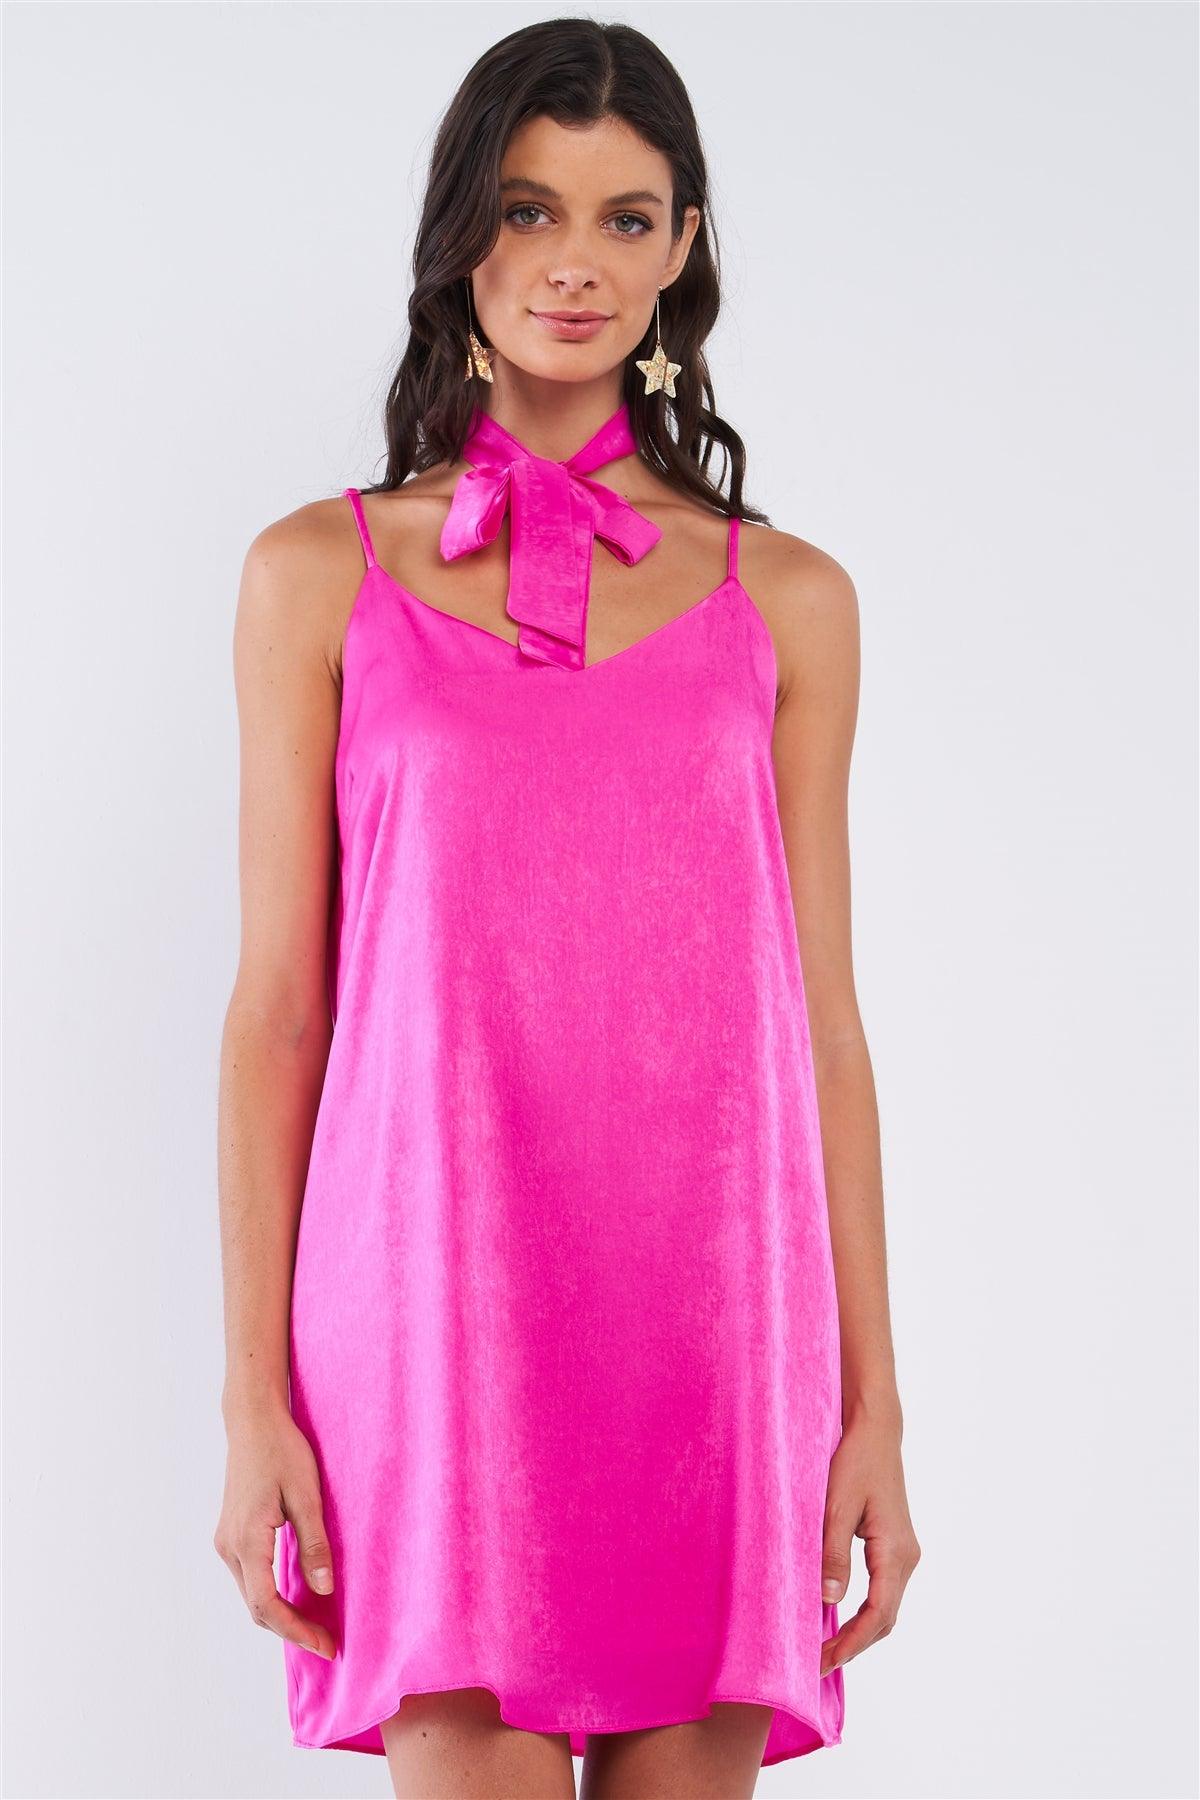 Magenta Pink Satin Relaxed Fit V-Neck Sleeveless T-Shaped Back Strap Mini Dress With Detachable Halter Tie